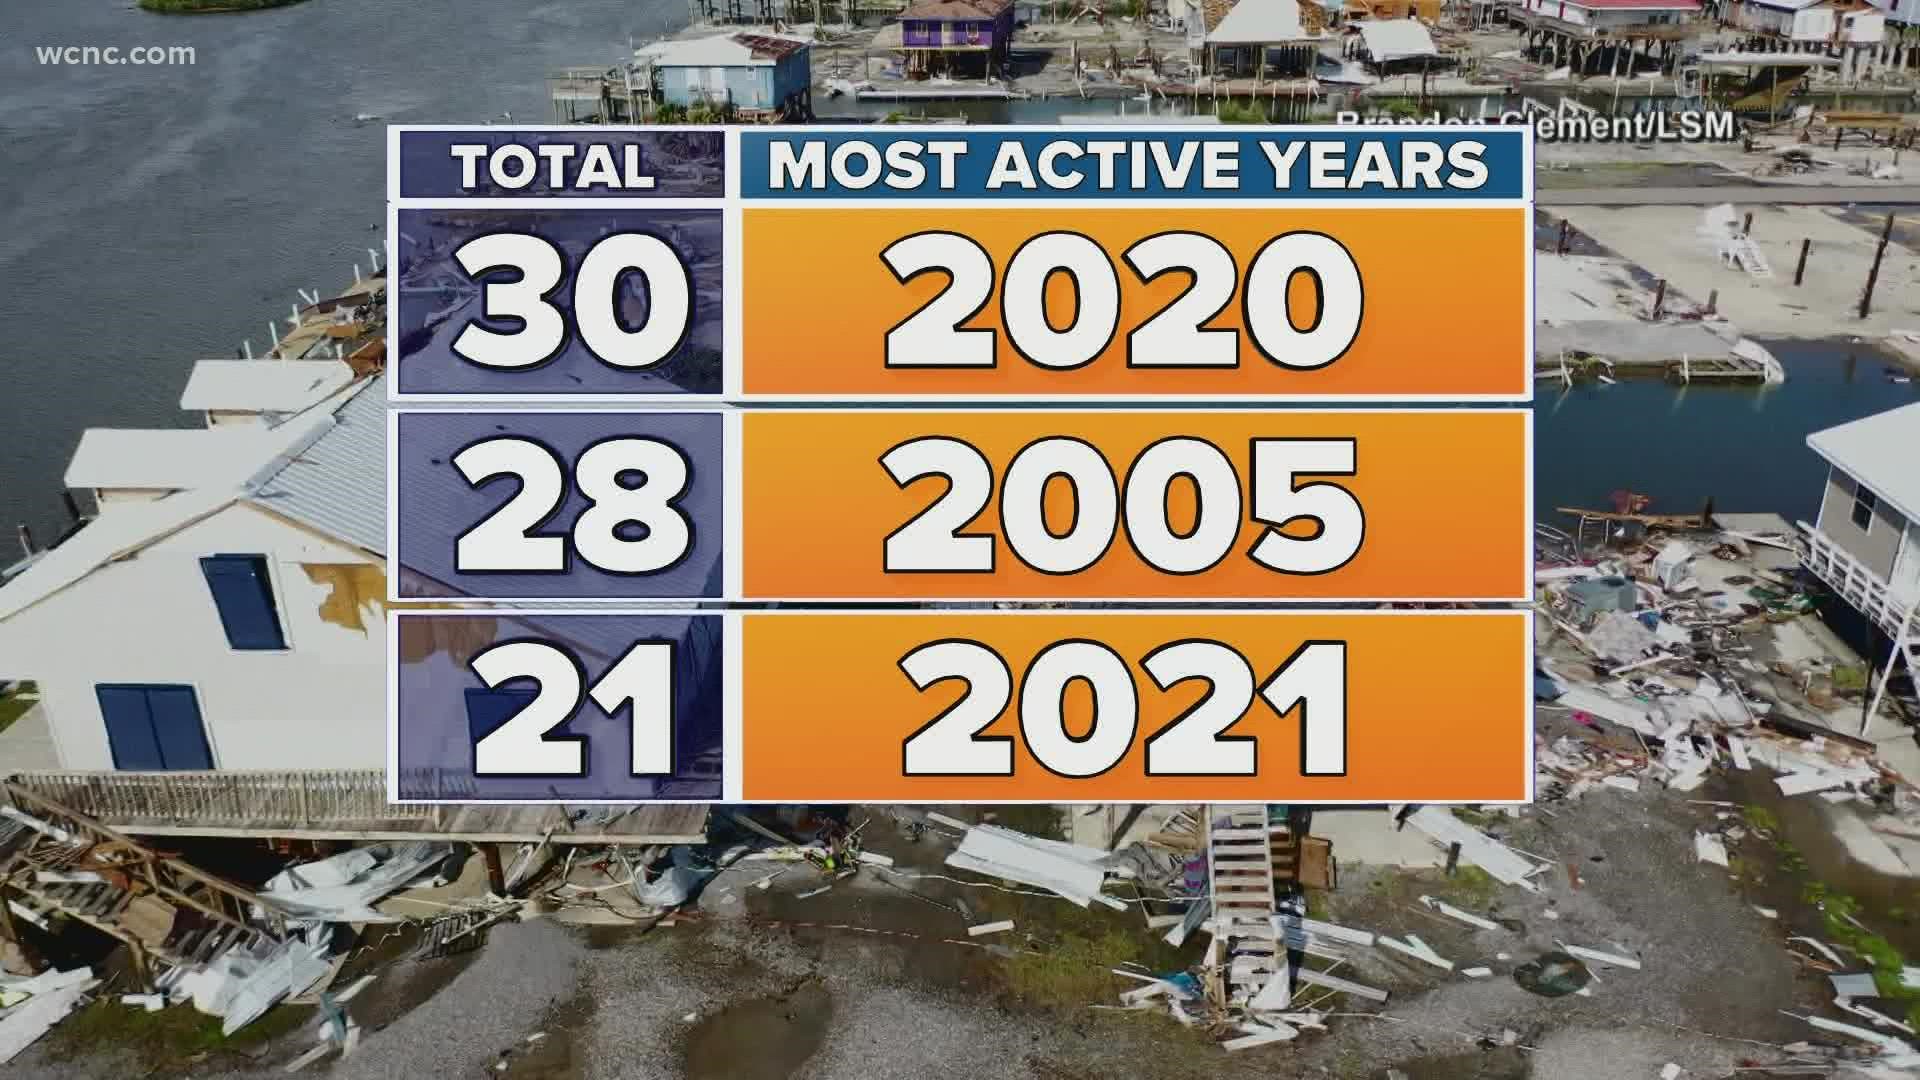 This was the third most active hurricane season on record and will be most remembered for one storm, Hurricane Ida.